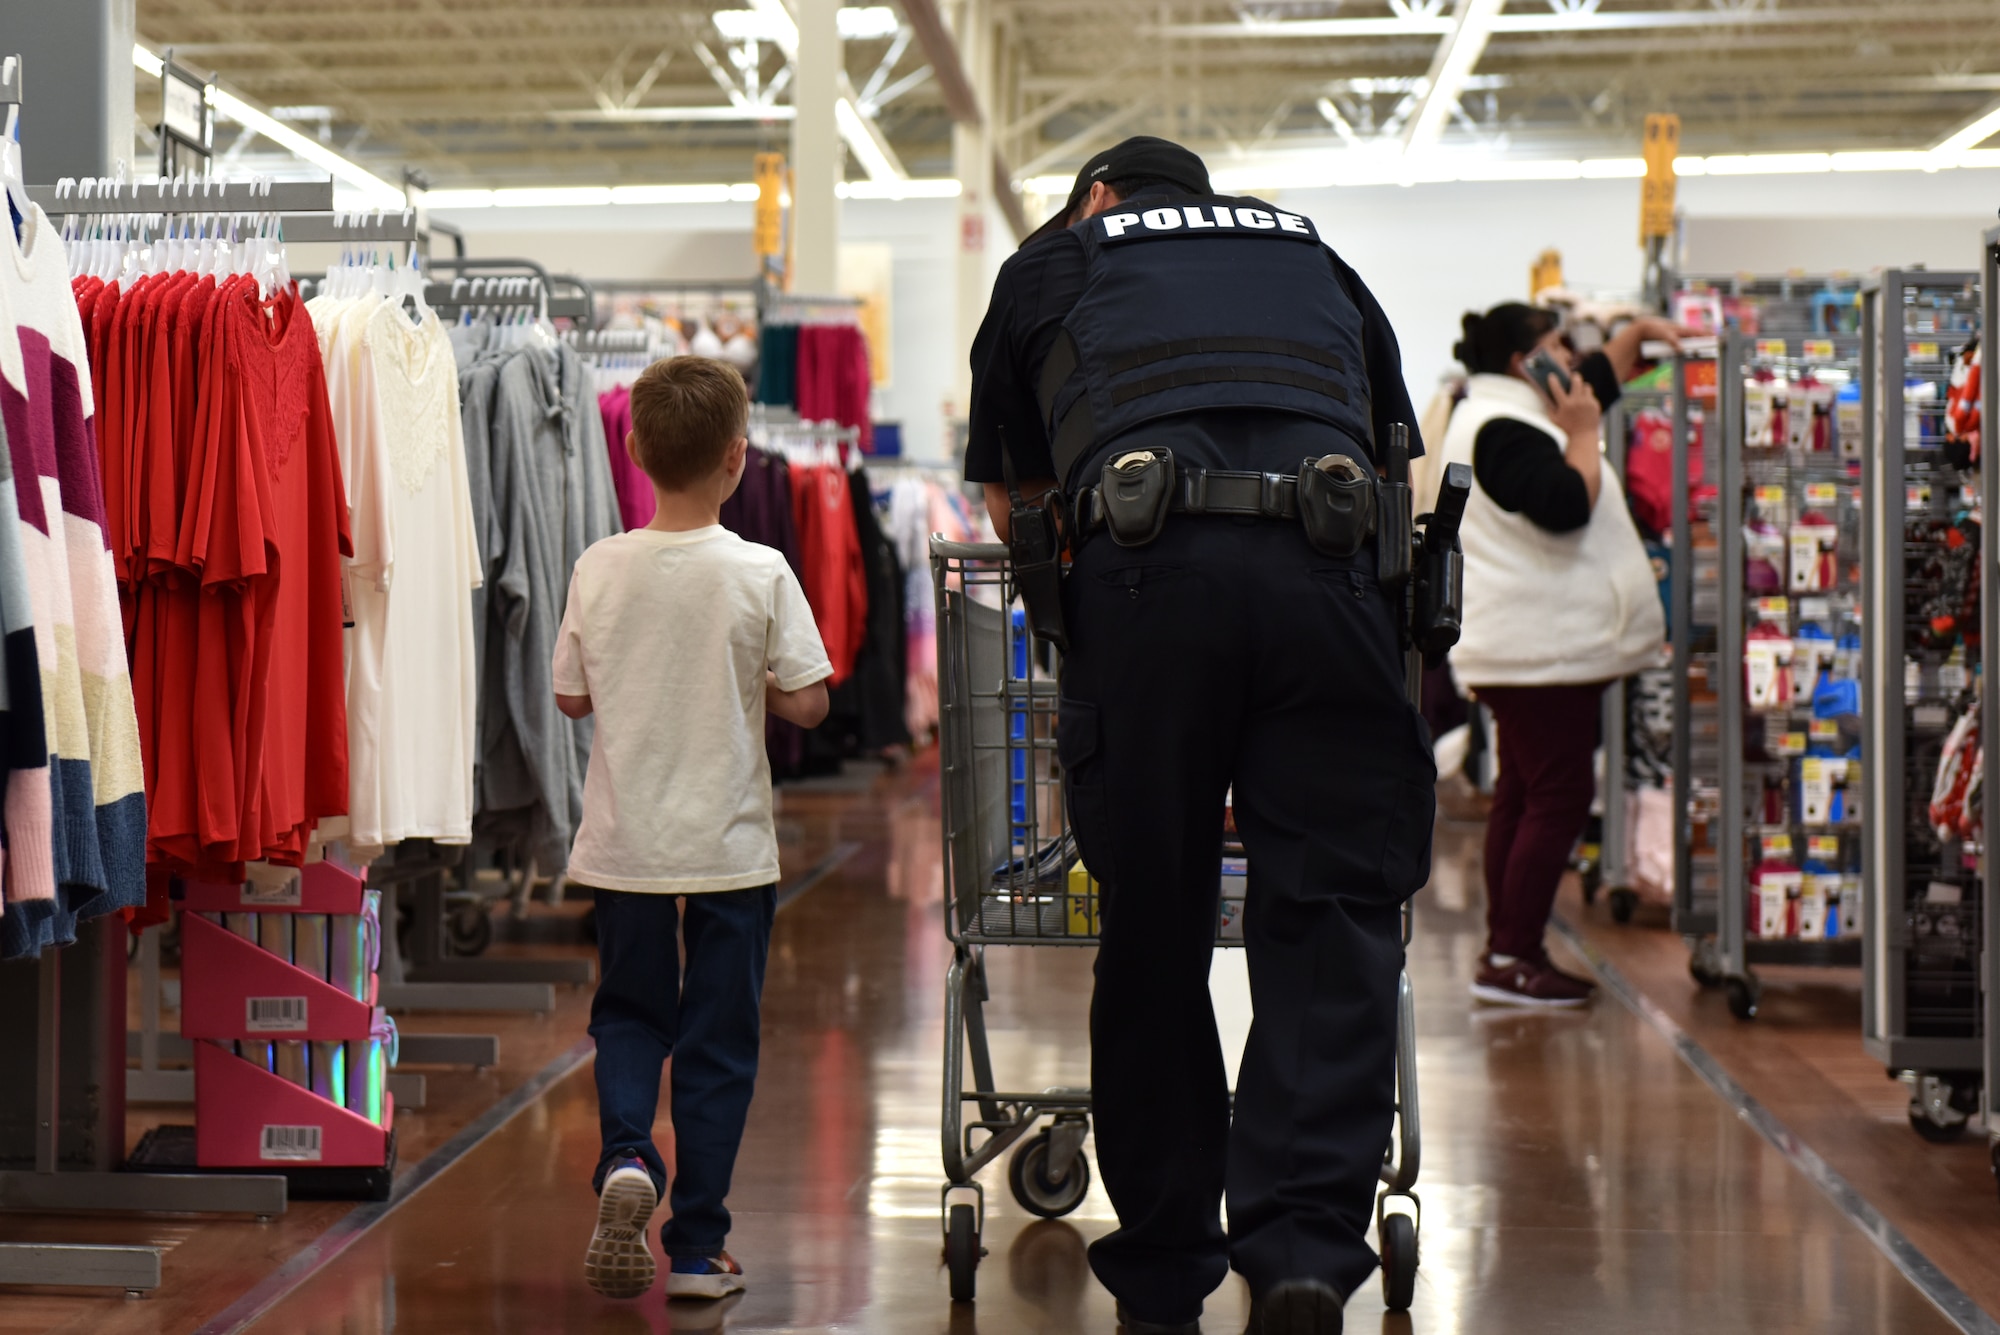 A child and his San Angelo police officer shopping partner walk while discussing what else they need to buy during the Operation Blue Santa Shop with a Cop event in San Angelo, Texas, Dec. 14, 2019. Each child who signed up for the event shopped with a police officer to purchase gifts for their family. (U.S. Air Force photo by Senior Airman Seraiah Wolf)